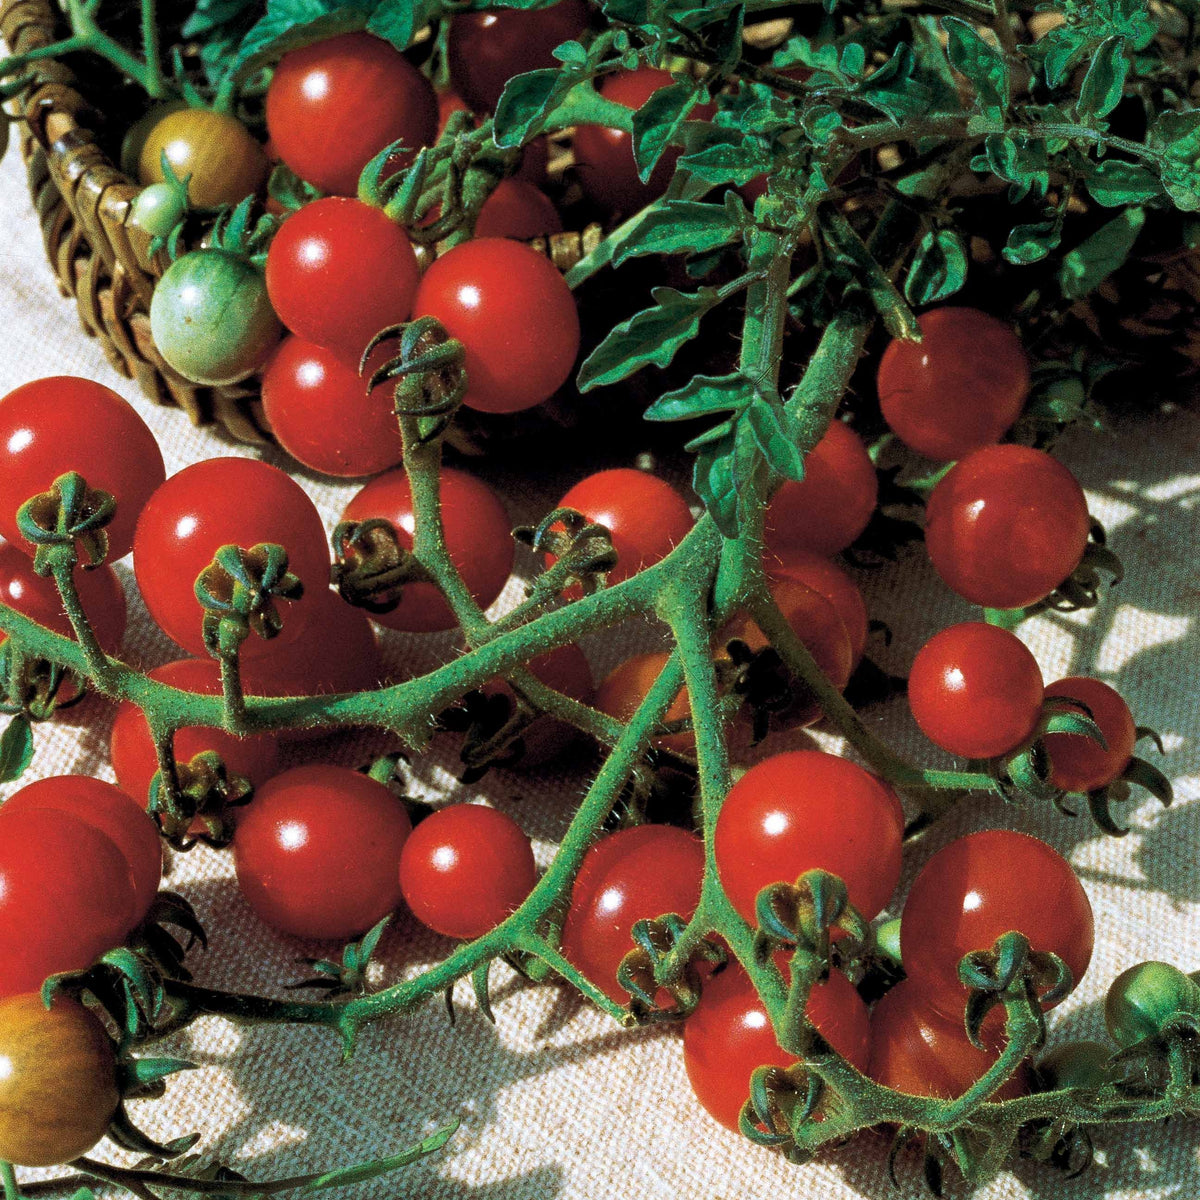 Tomate Rosso Cremlin F1 - type Sweet 100 - Solanum lycopersicum rosso cremlin f1 - Potager